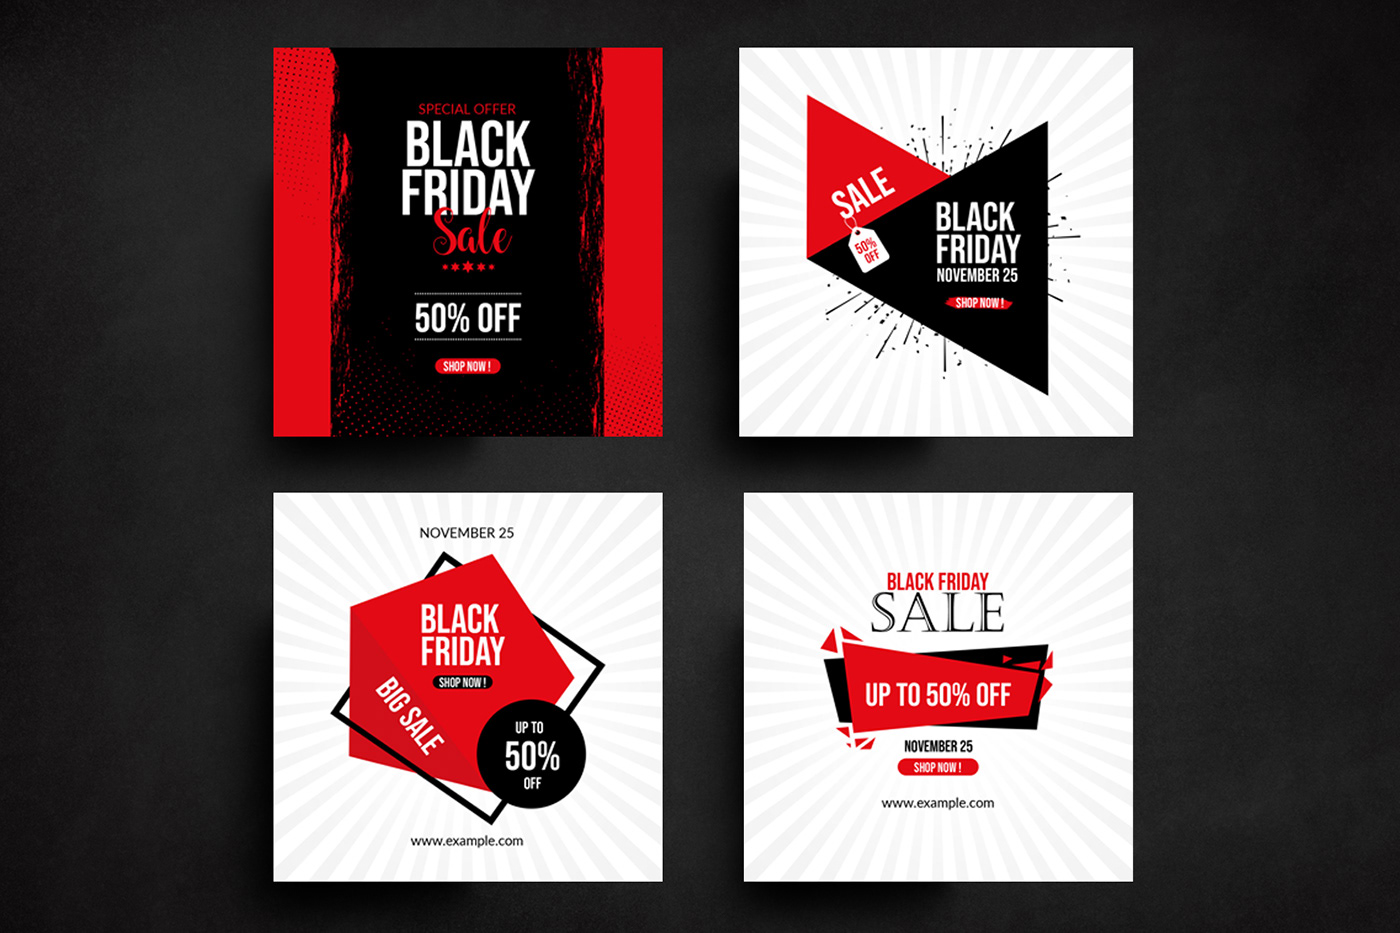 Advertising  Black Friday black friday sale black friday sale banner Christmas Sale Cyber Monday discount Holiday photoshop template sale banner